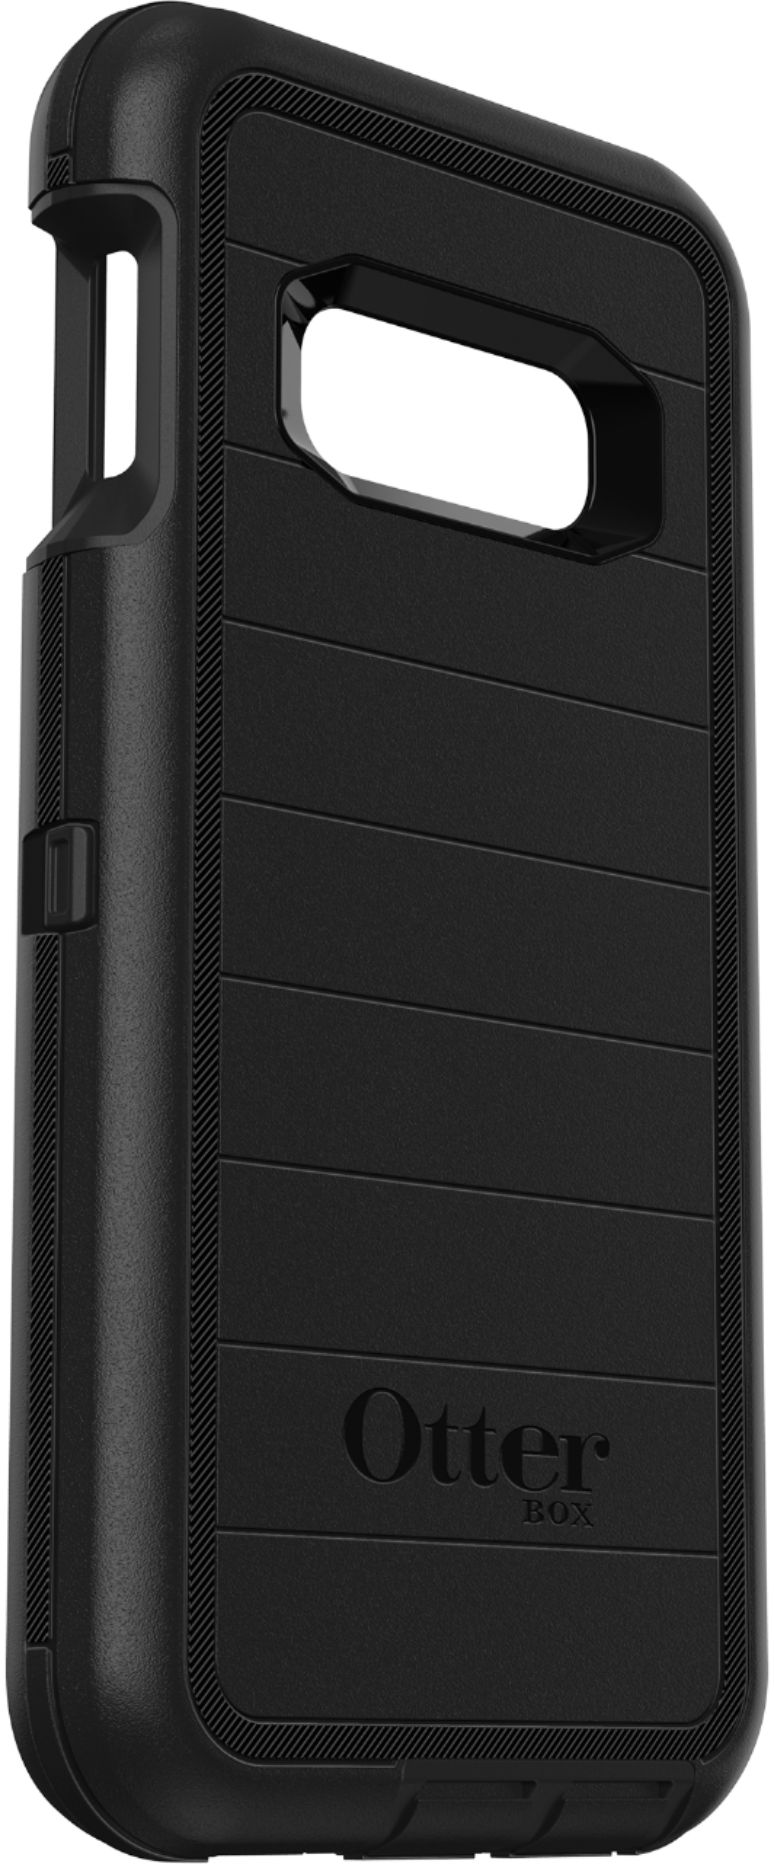 Angle View: OtterBox - Defender Series Pro Holster Case for Samsung Galaxy S10e - Black